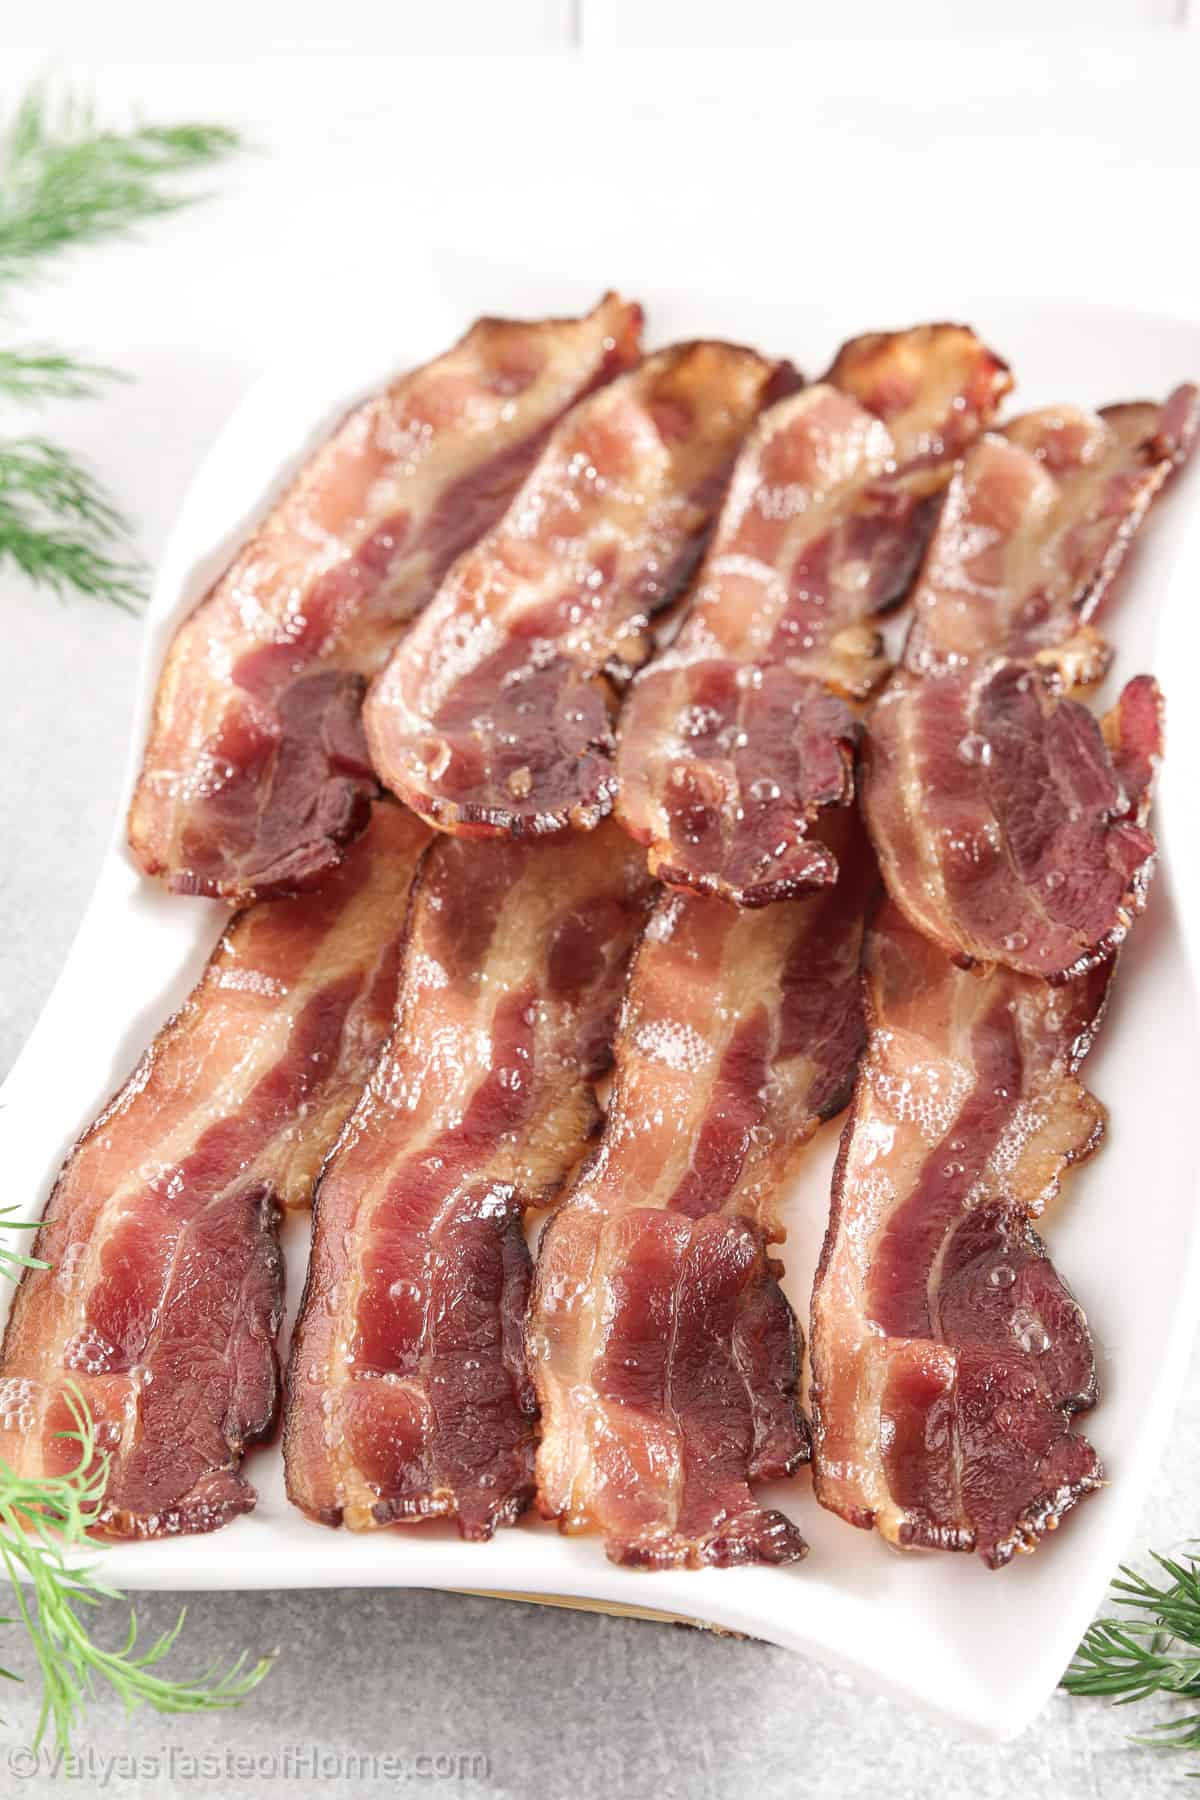 https://www.valyastasteofhome.com/wp-content/uploads/2019/11/How-to-Make-Perfect-Quick-and-Easy-Oven-Broiled-Bacon-2.jpg